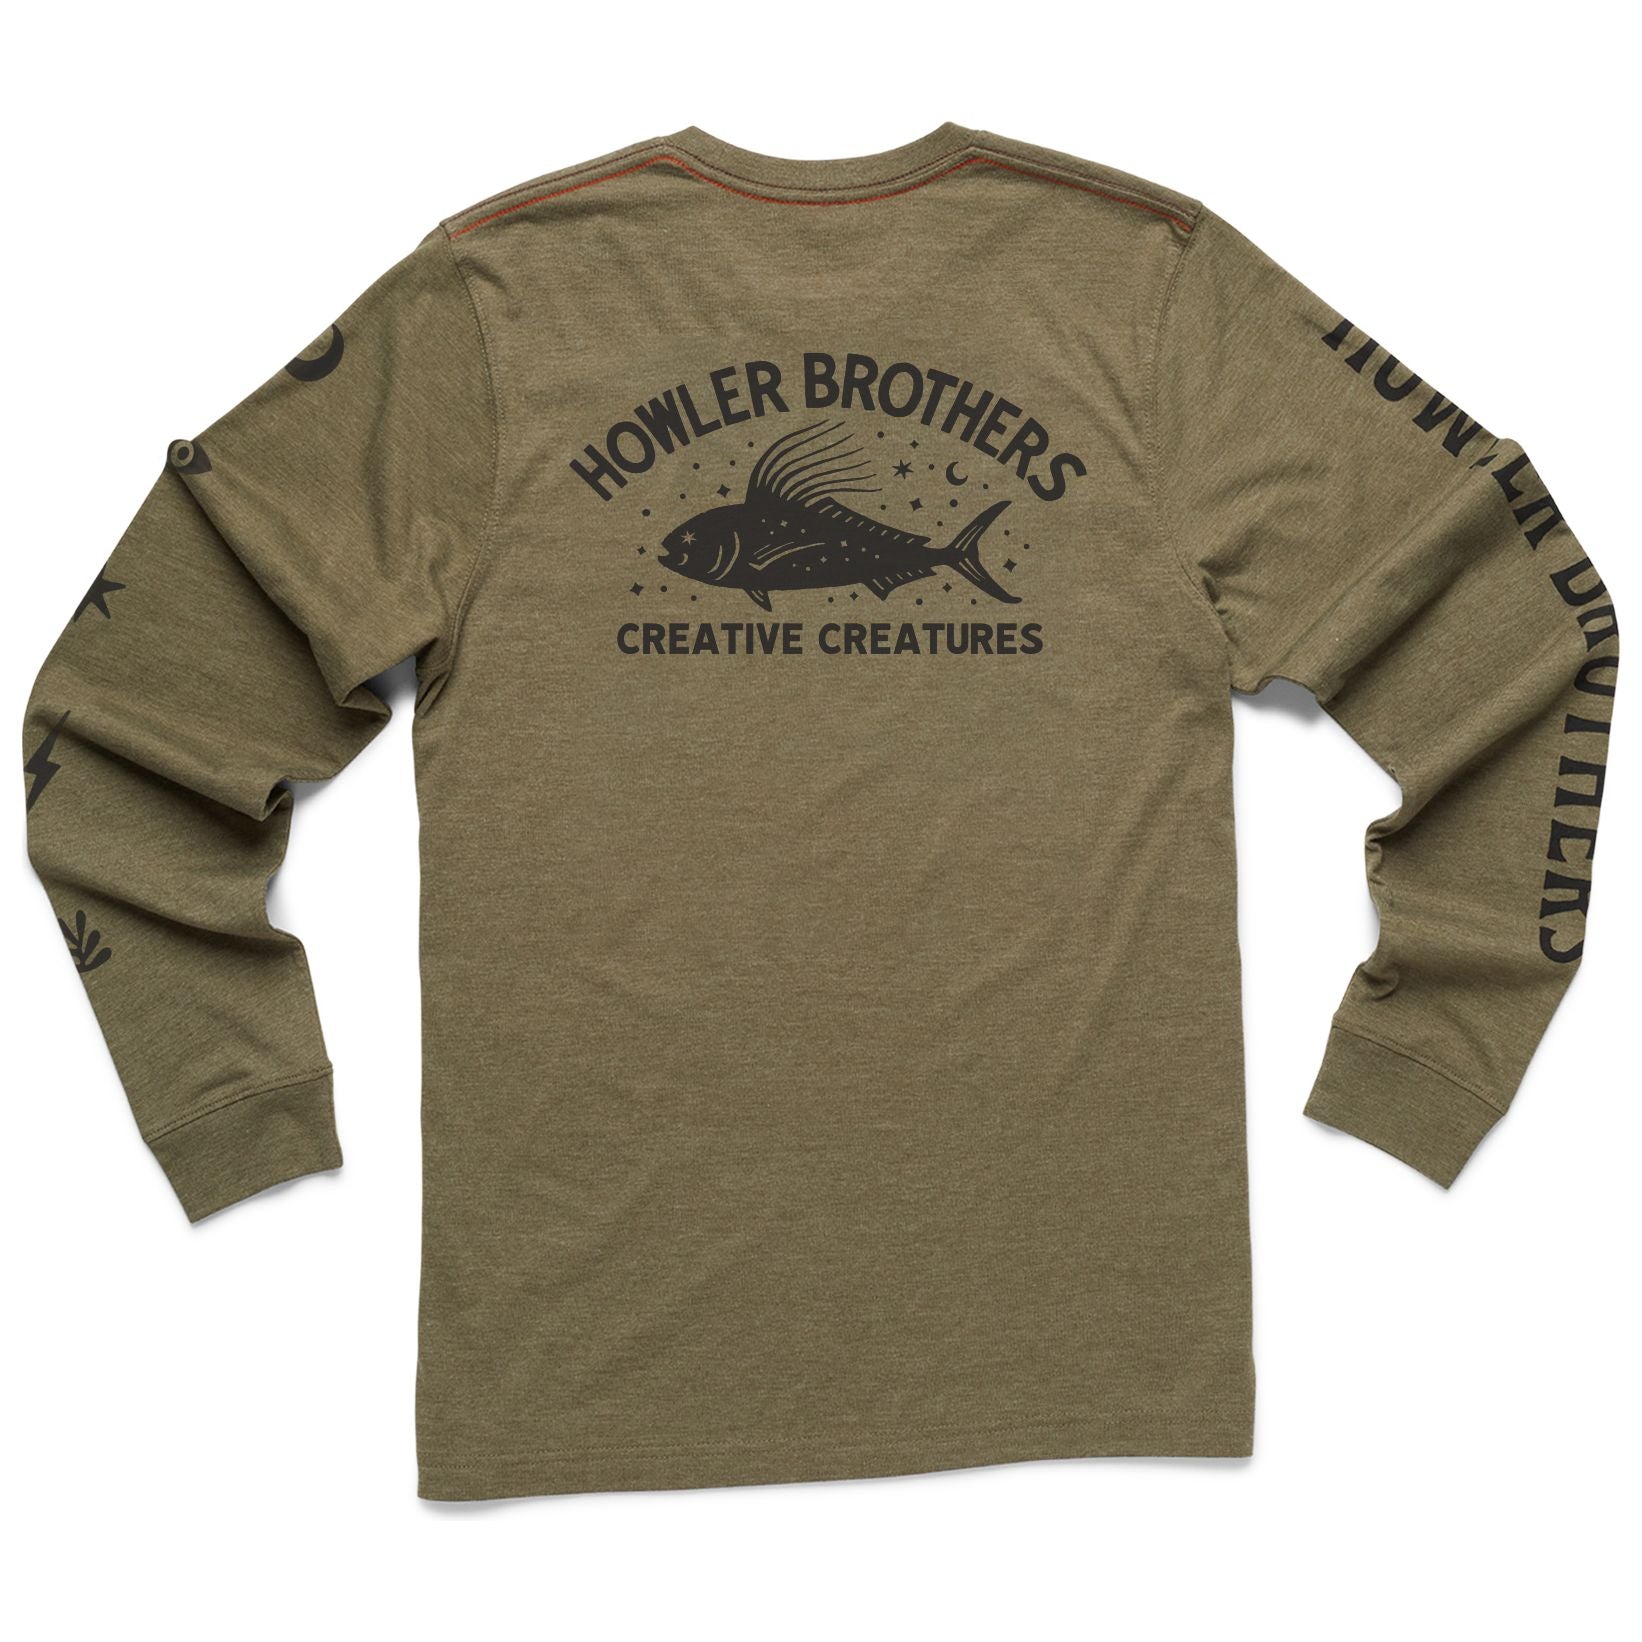 Howler Brothers Select Longsleeve T - Creative Creatures Roosterfish : Fatigue Heather Image 01